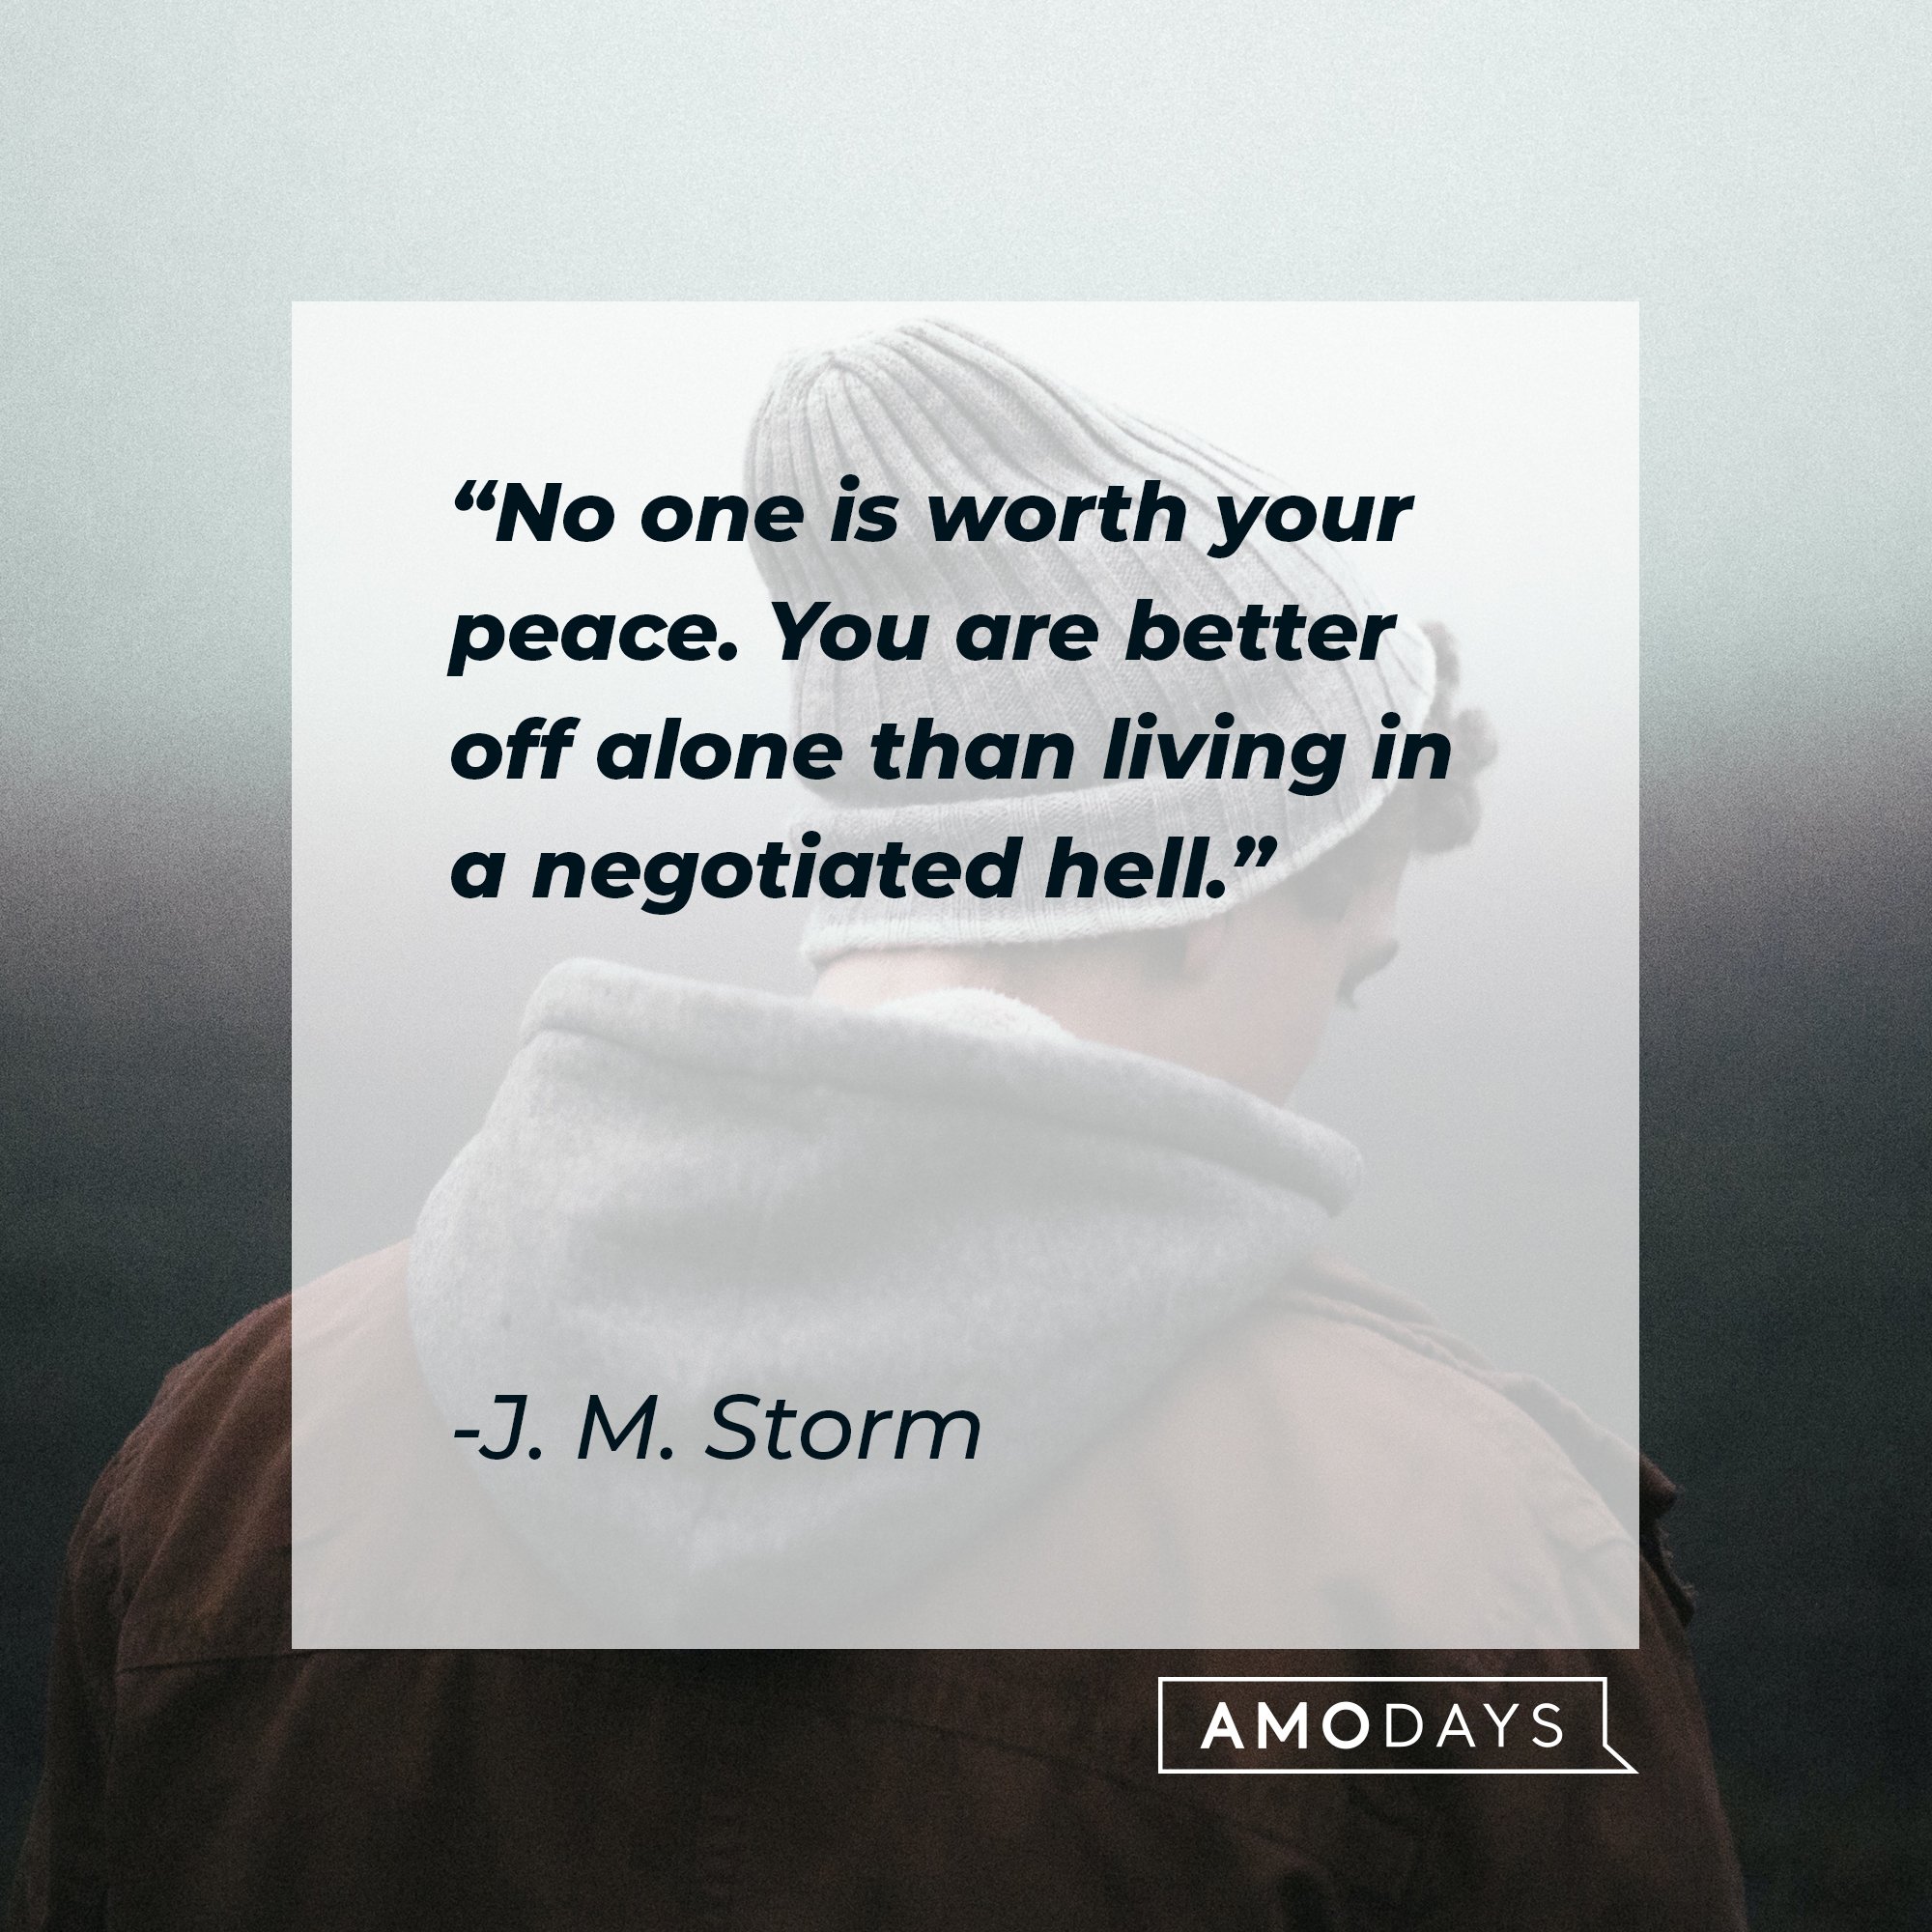 J. M. Storm’s quote: "No one is worth your peace. You are better off alone than living in a negotiated hell." | Image: AmoDays